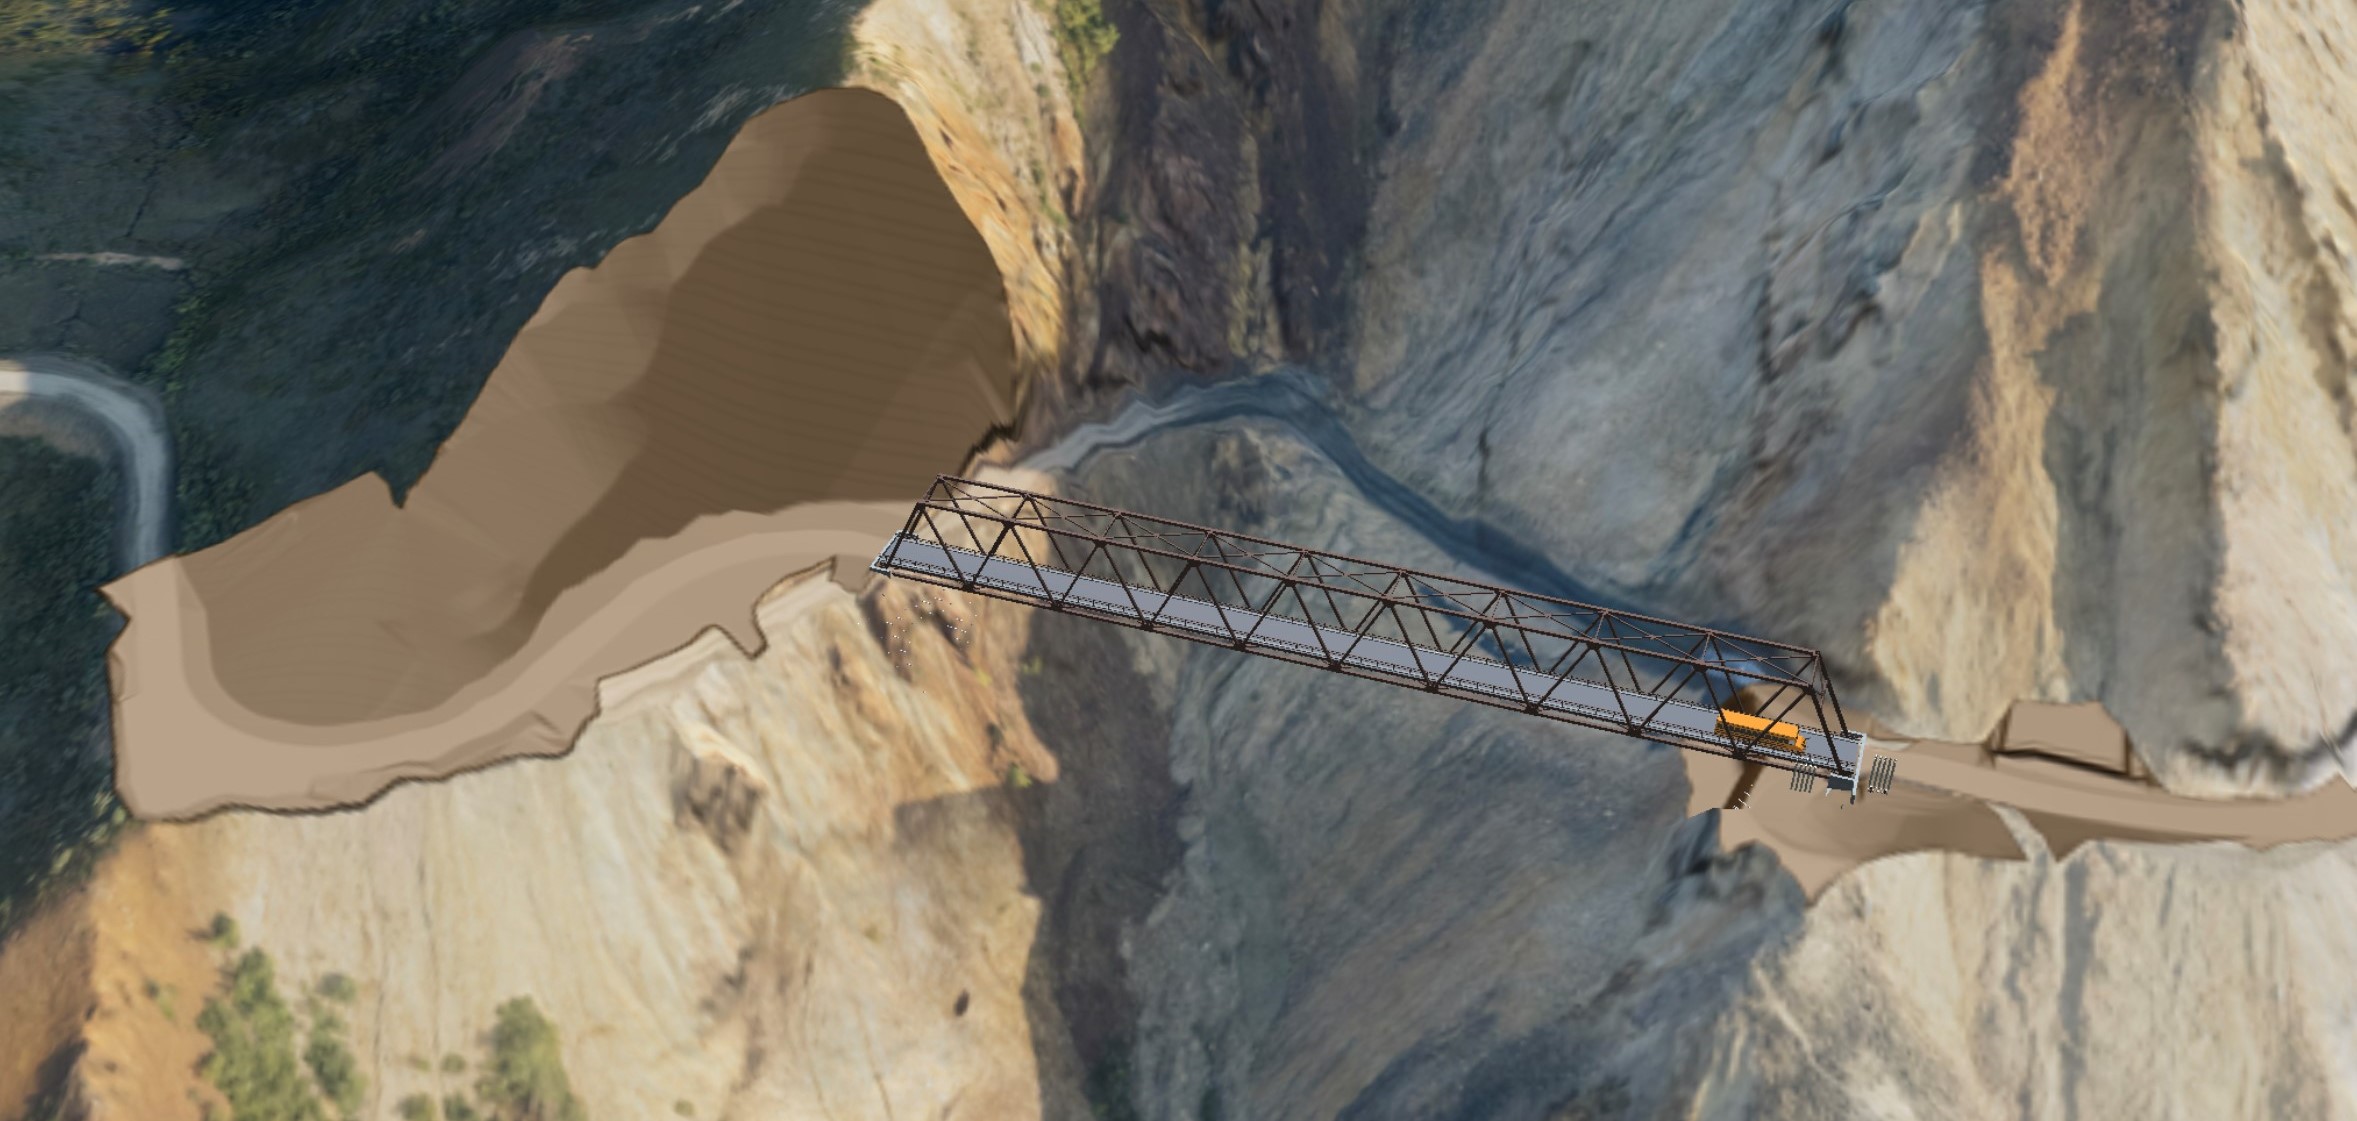 A computer-generated image of a bridge with many diagonal metal trusses. It stretches across a slumping mountainside and rock has been excavated on both sides to make room for the bridge.